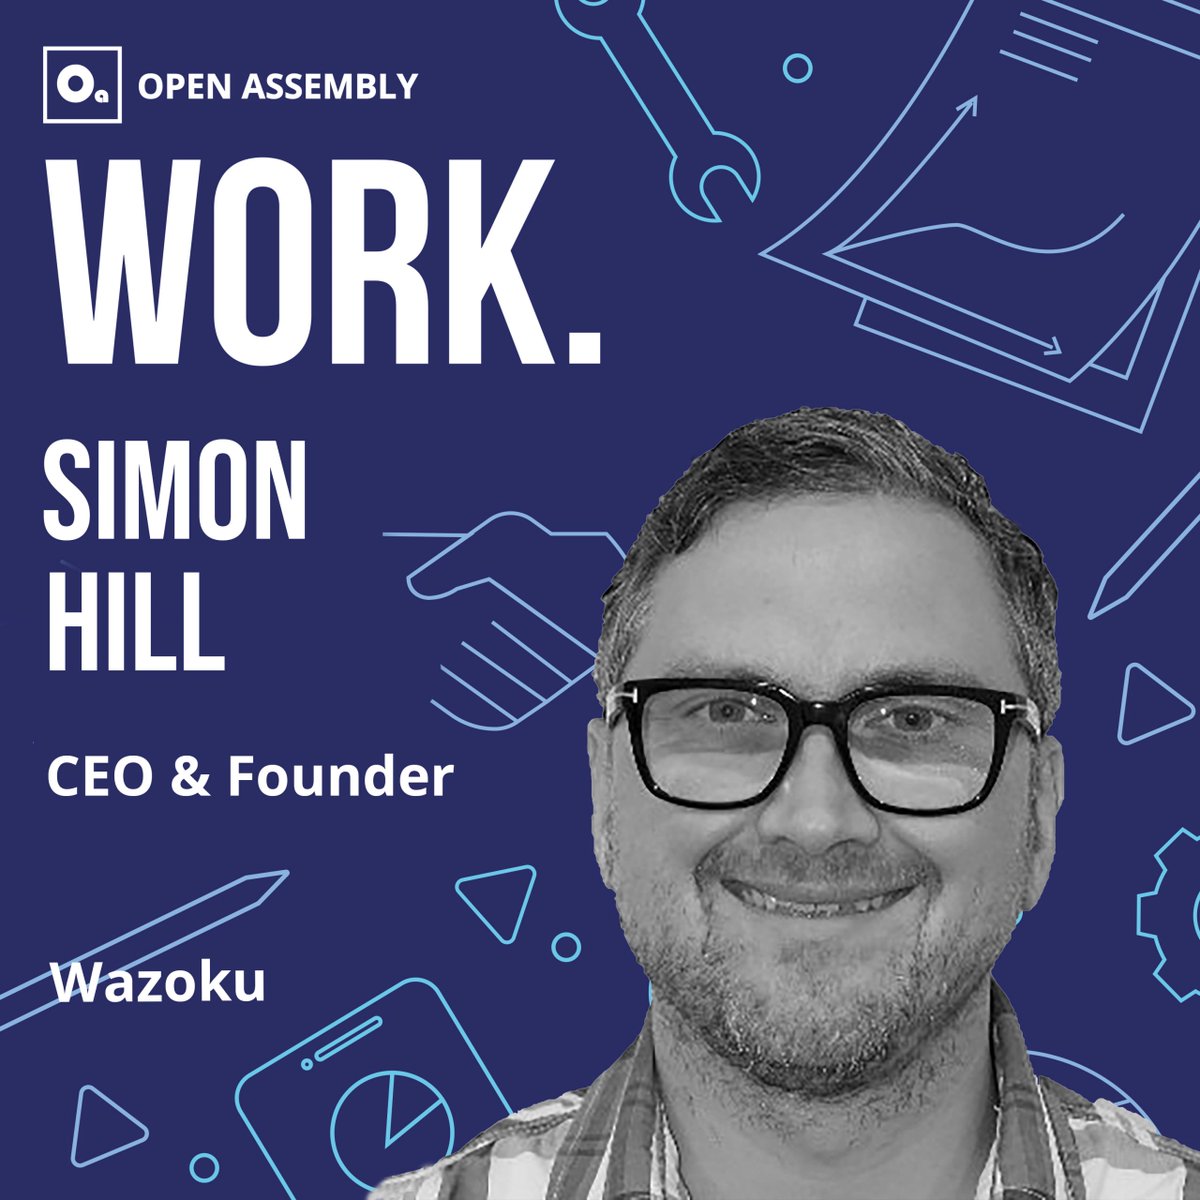 Have a listen to the new episode of the WORK podcast from Open Assembly featuring Simon Hill, chatting about what Wazoku has been up to over the last 2 years ! Listen here: bit.ly/3PvNsx1

#OpenTalent #Podcast #Innovation